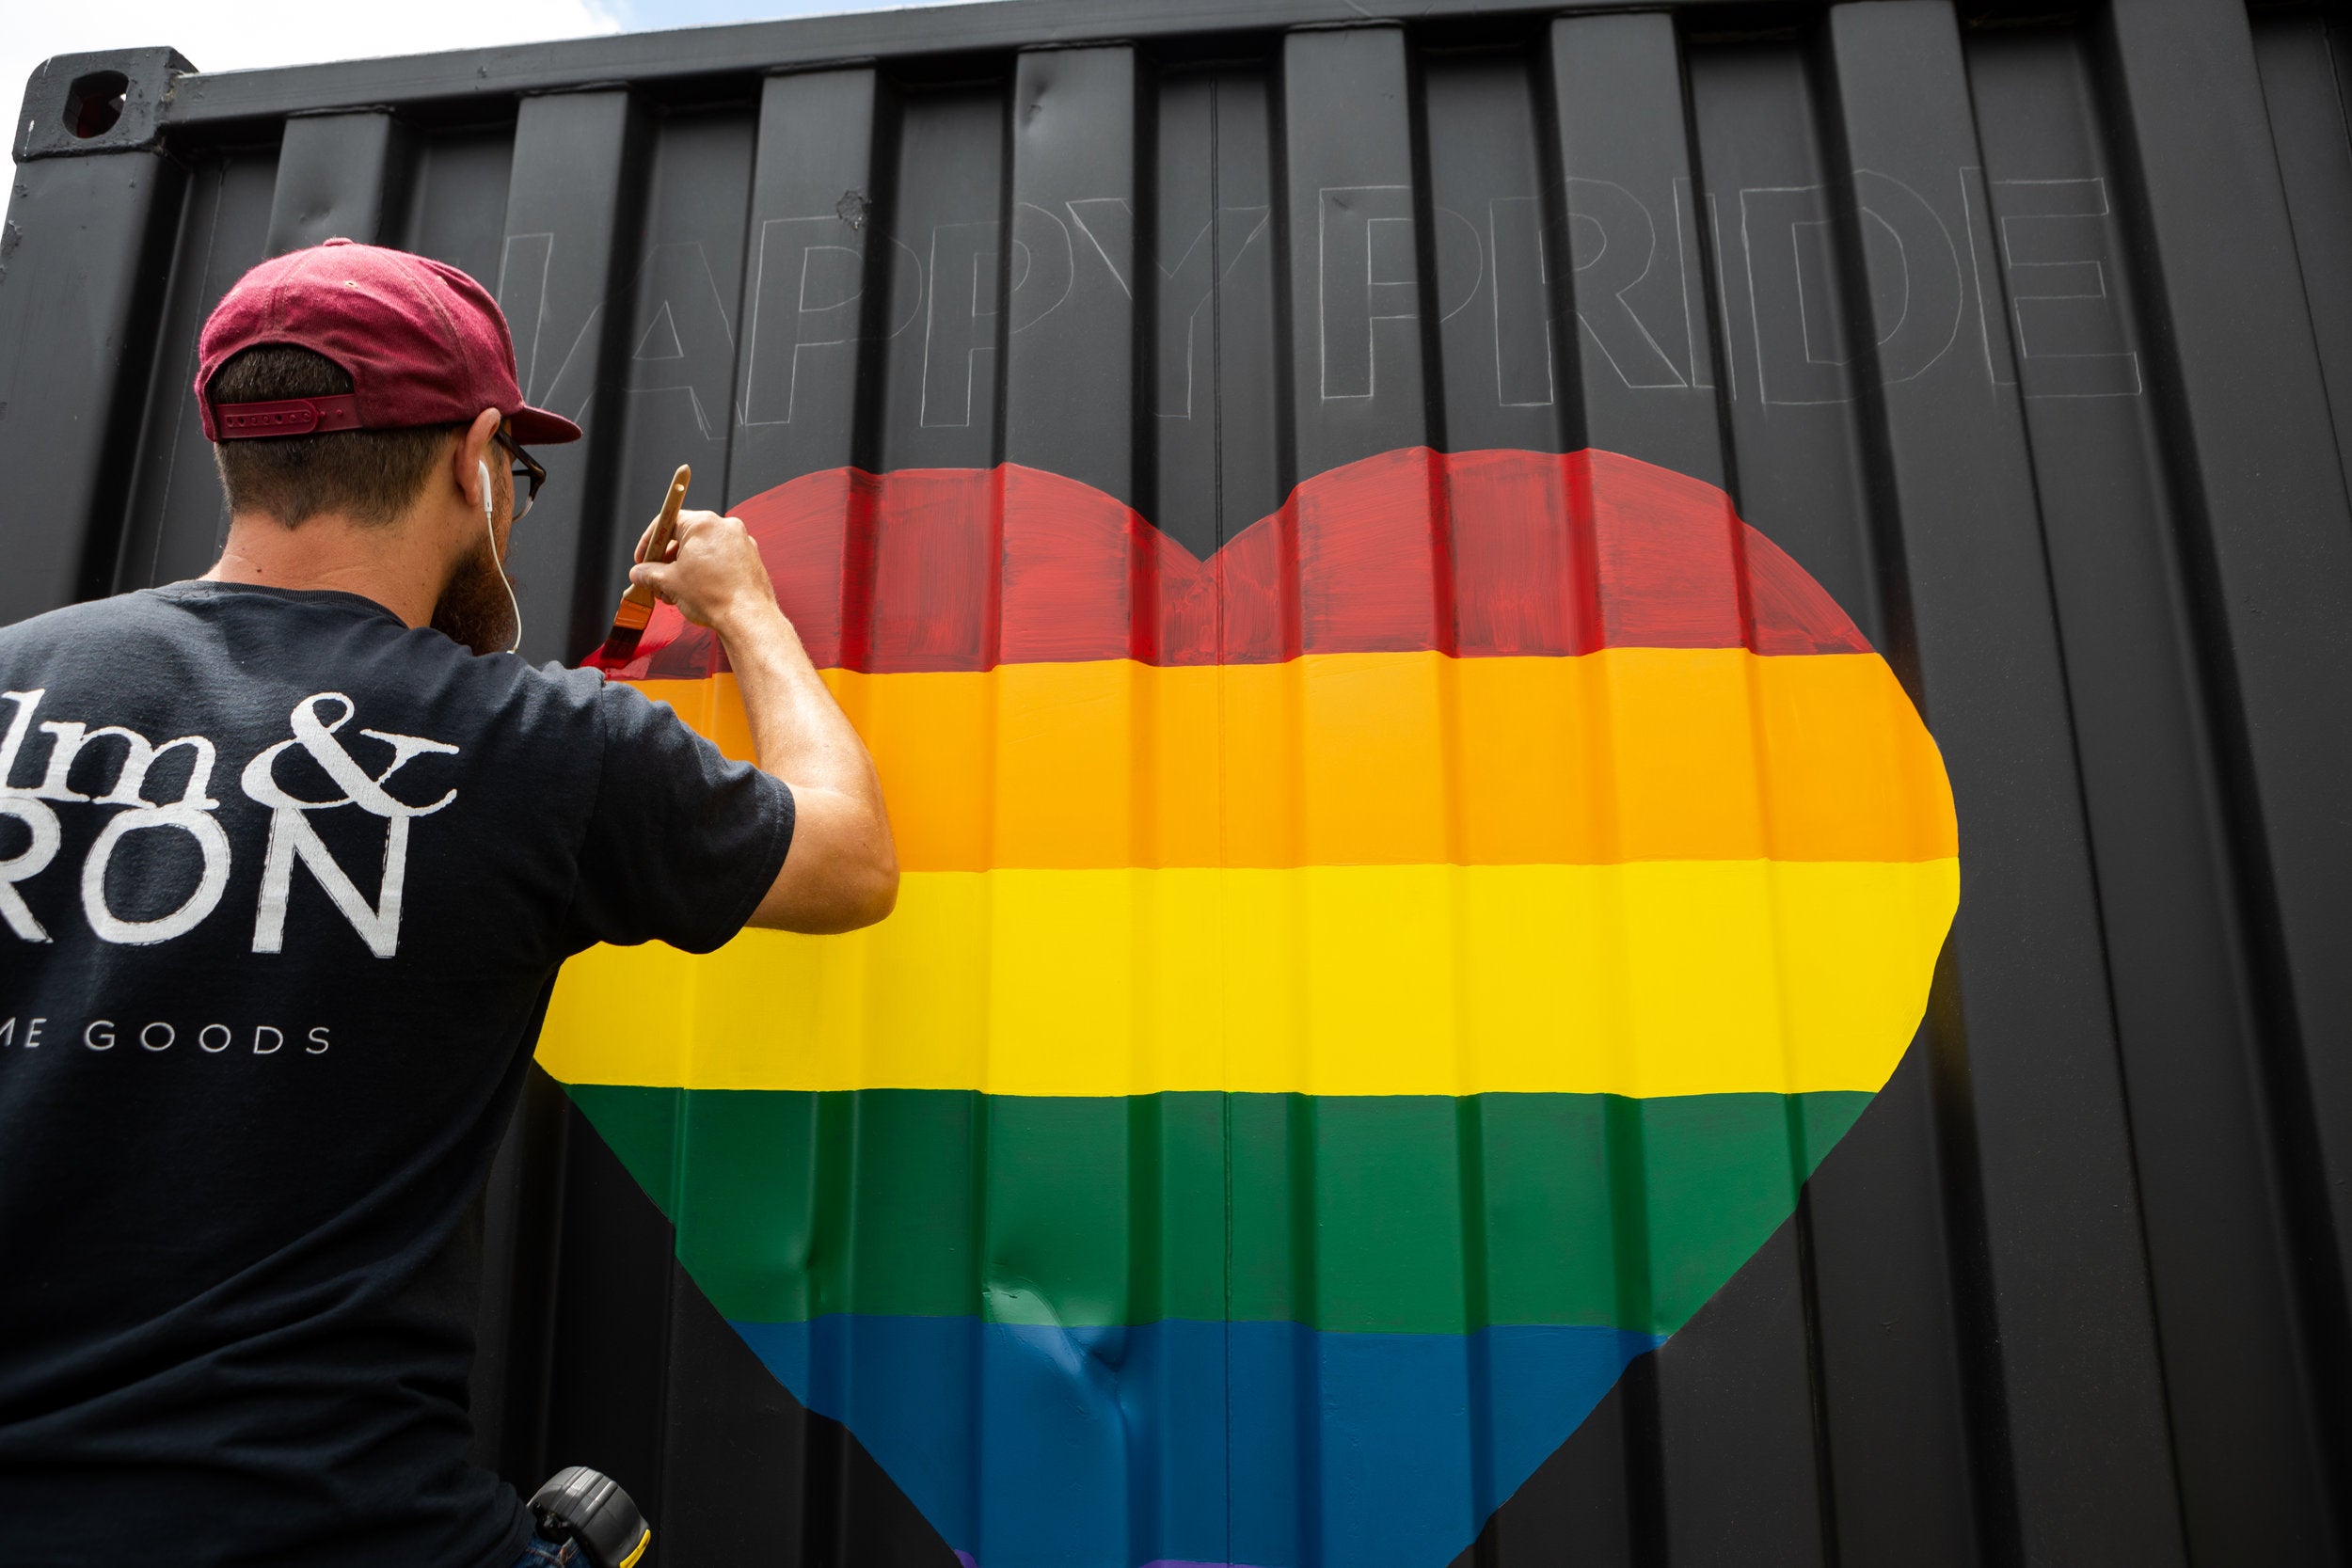 Tony, painting “Happy Pride” on one of our elm & IRON trailers.